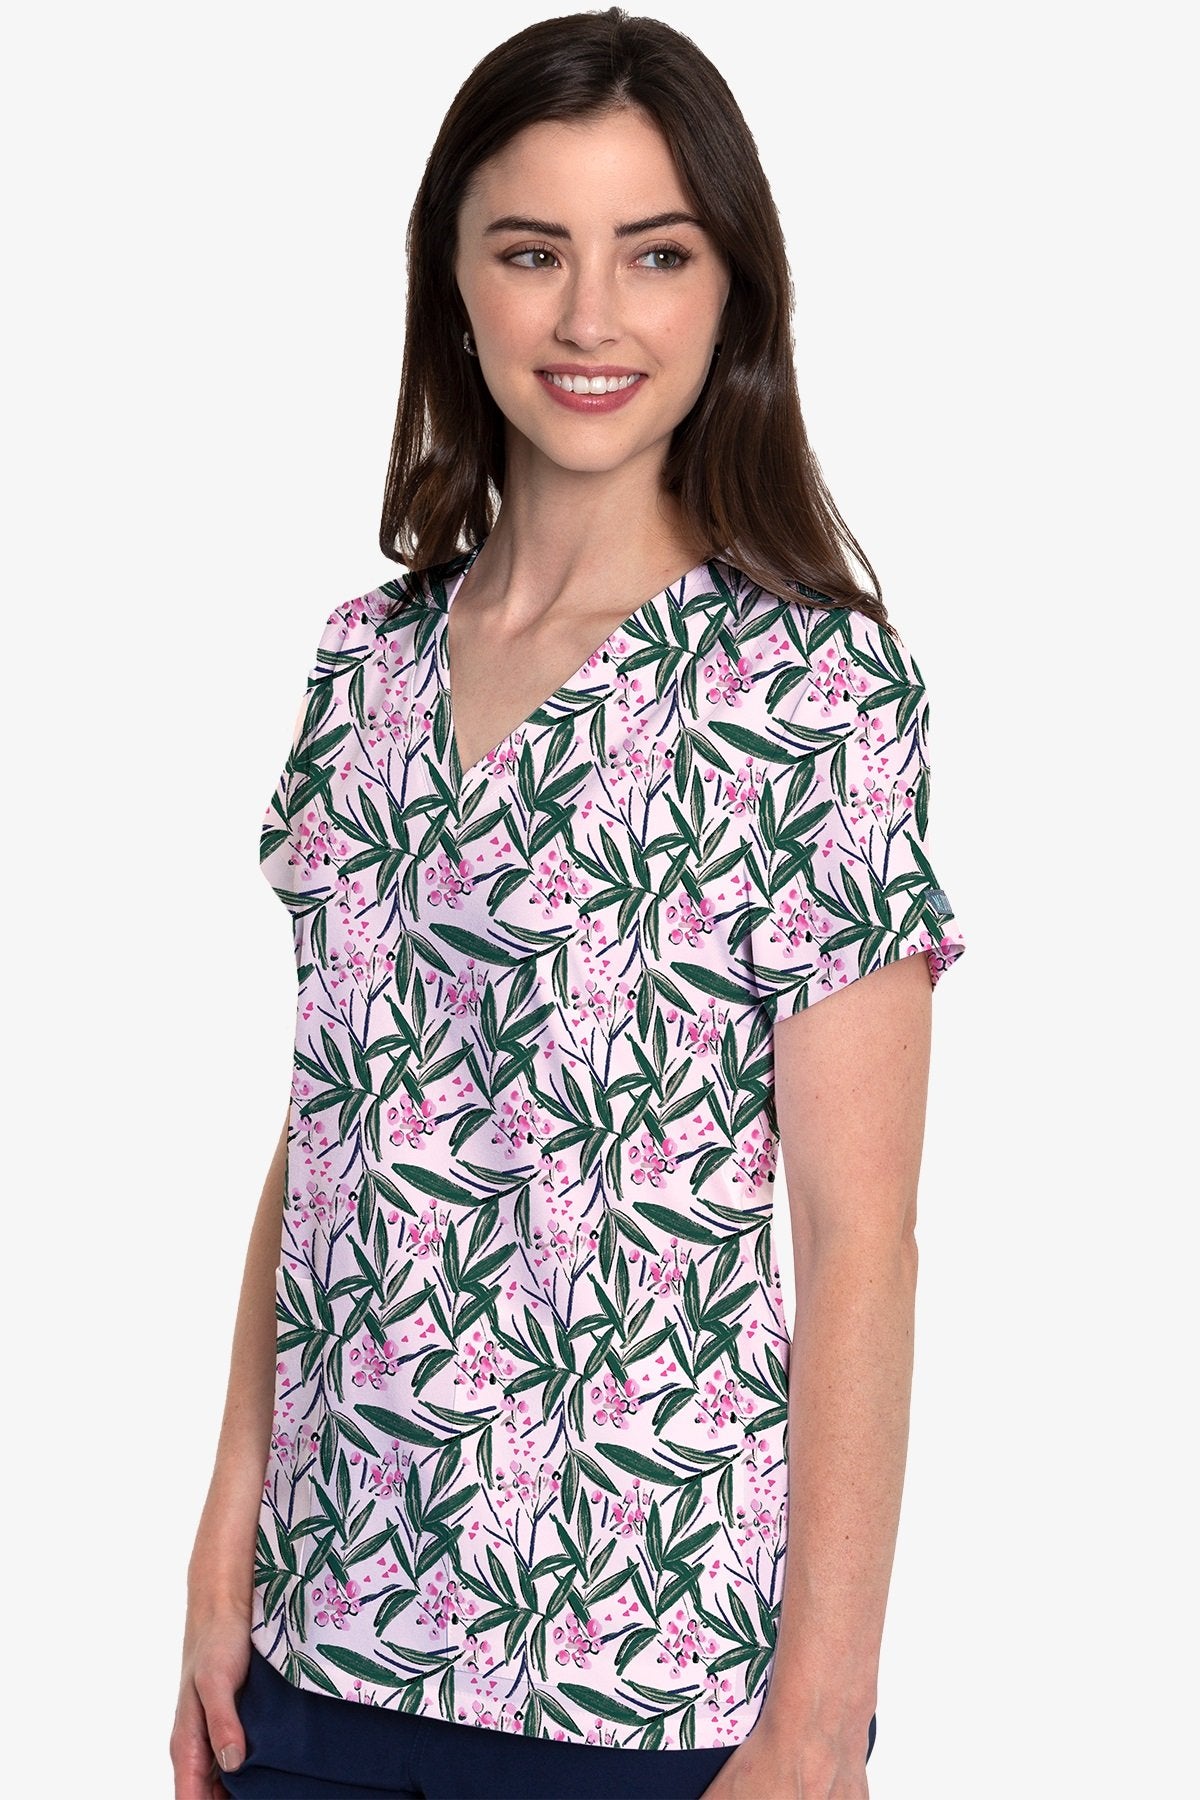 Med Couture Scrub Top Print Plus Sizes Palm